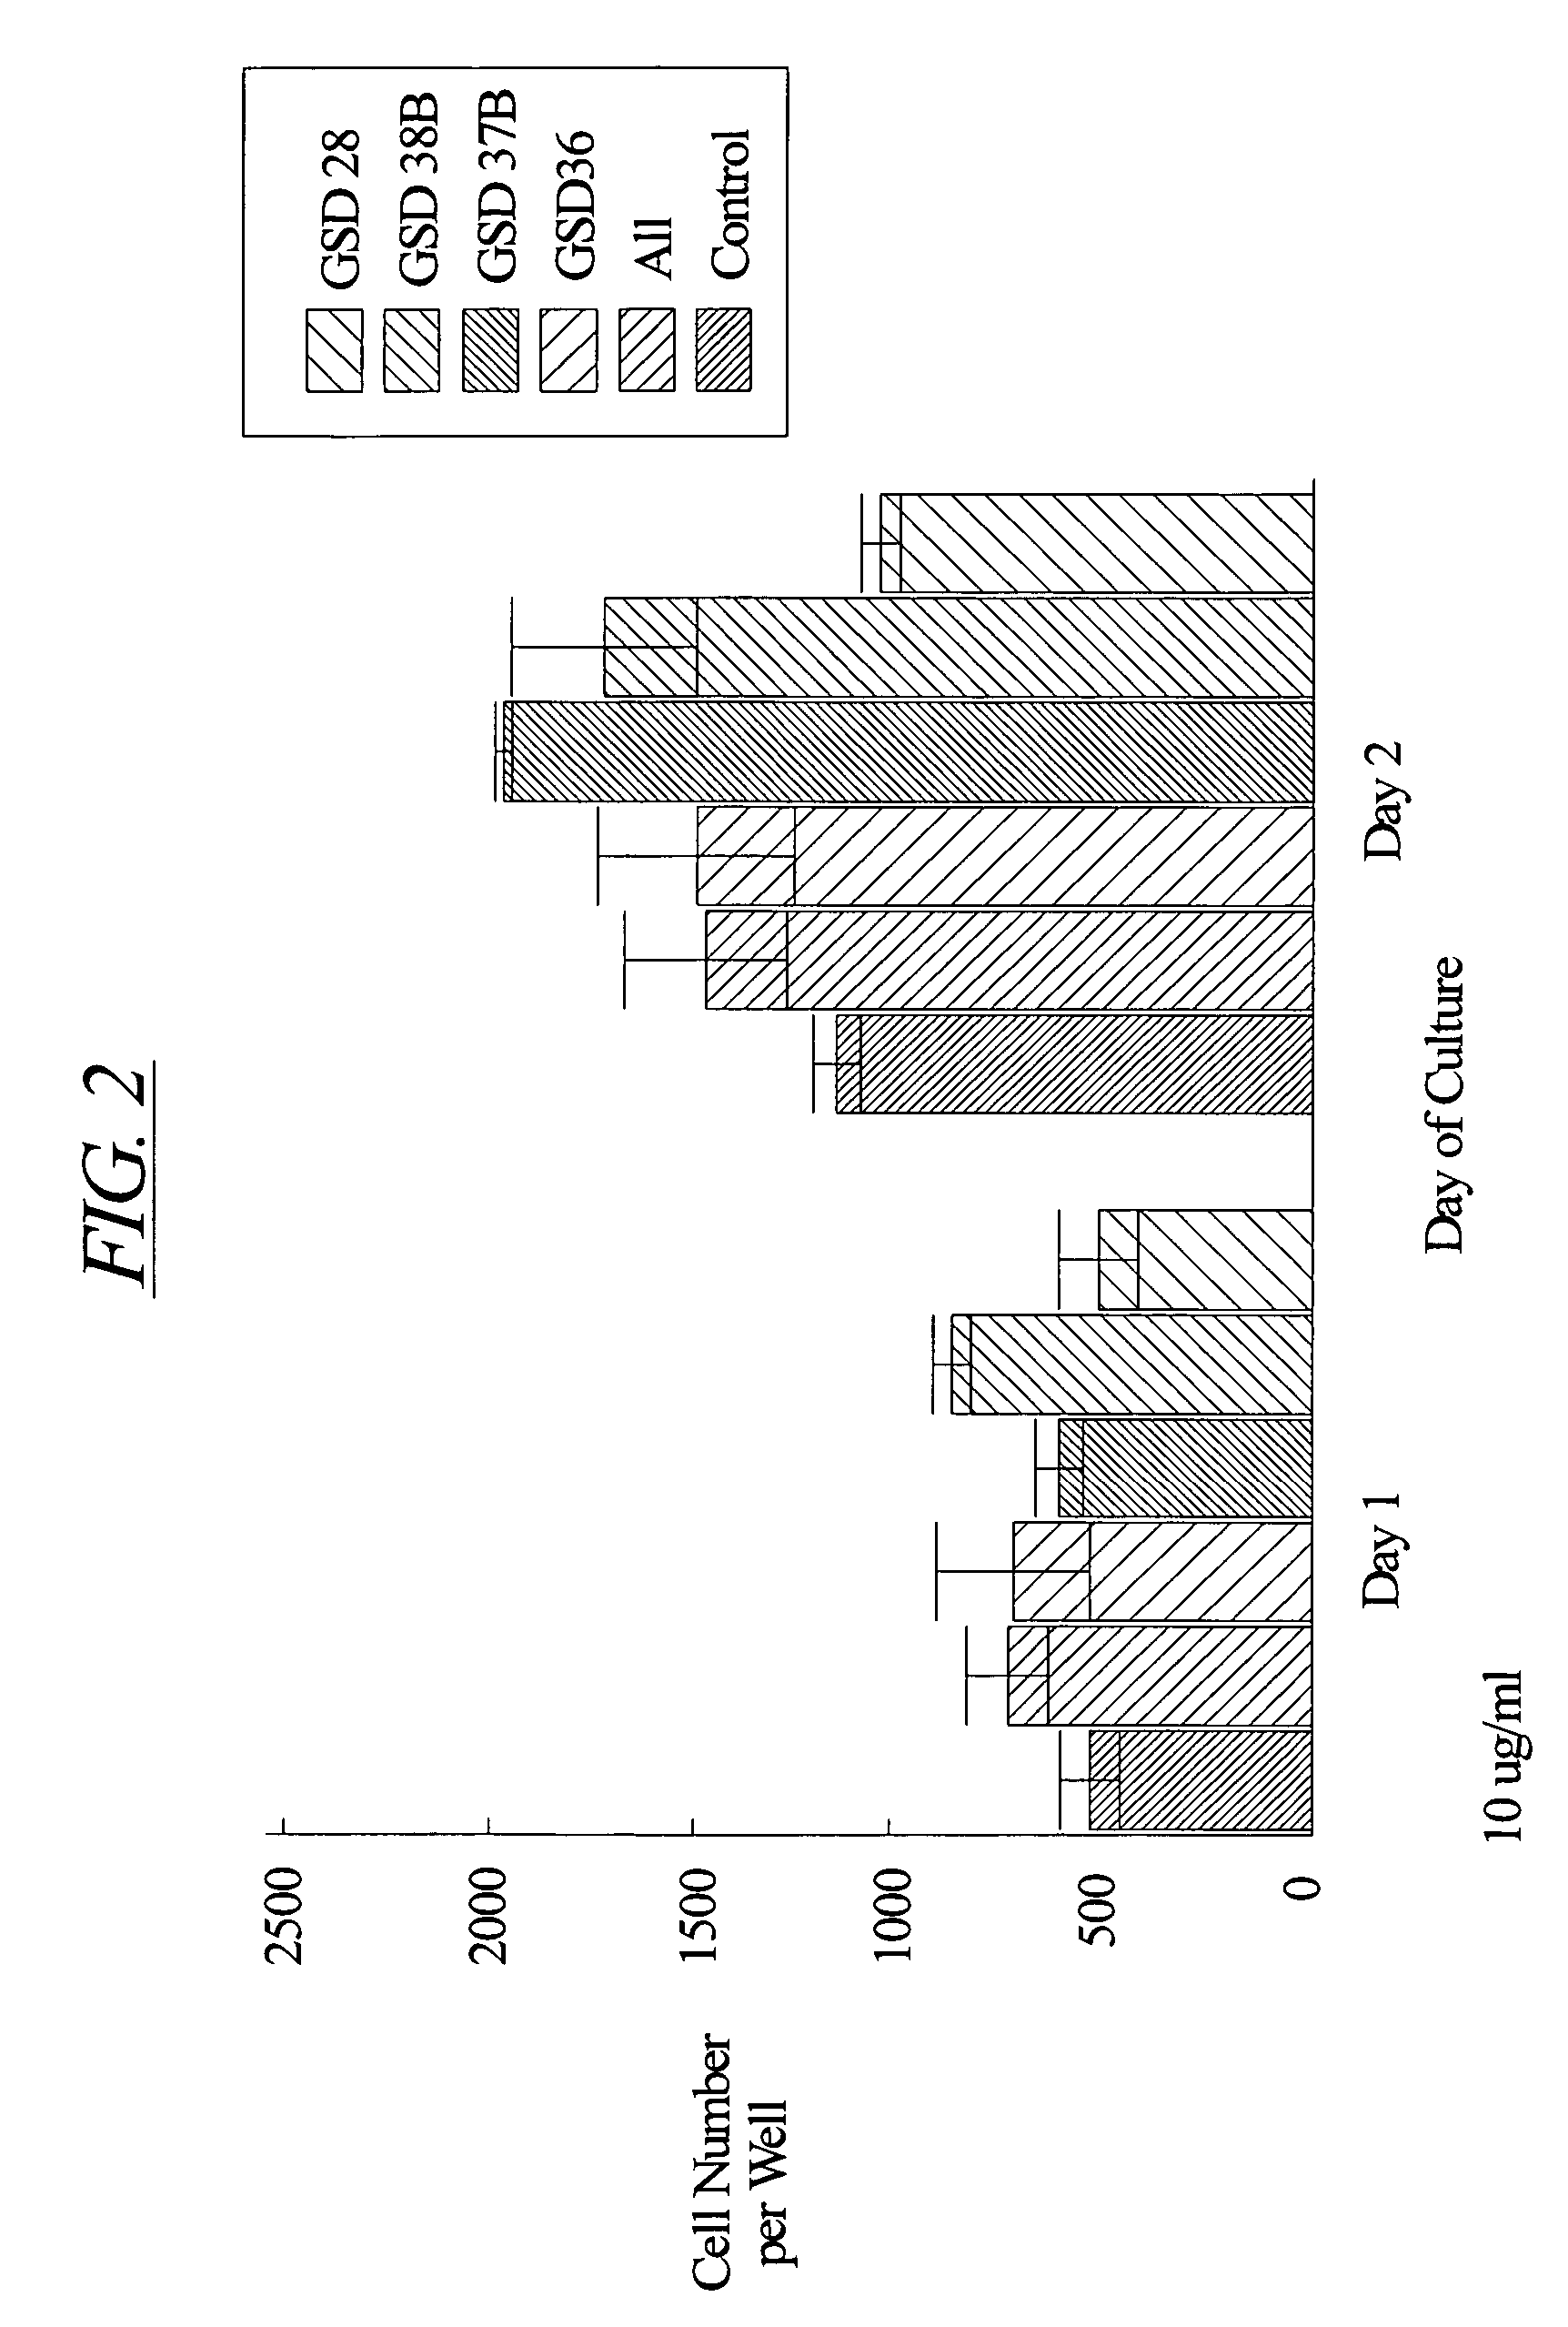 Methods for accelerating bone, cartilage, and connective tissue growth